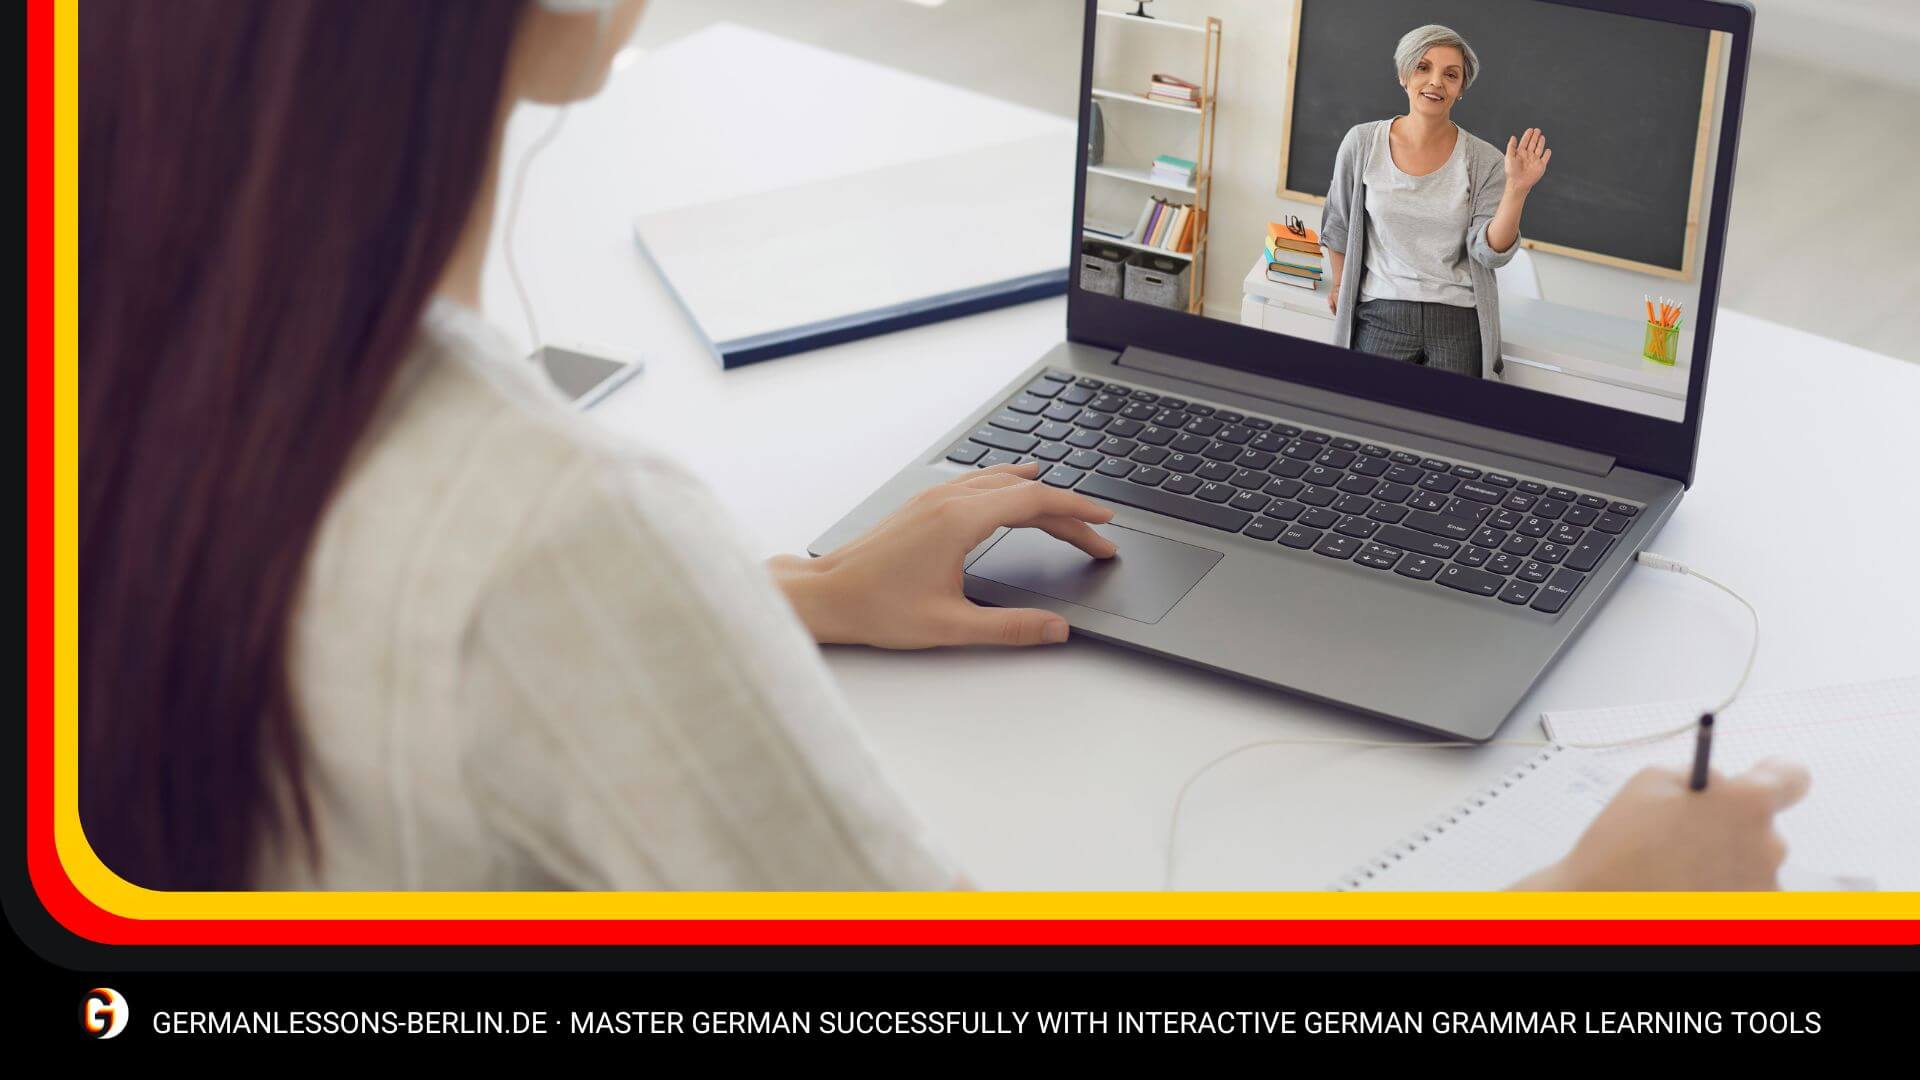 Master German Successfully with Interactive German Grammar Learning Tools